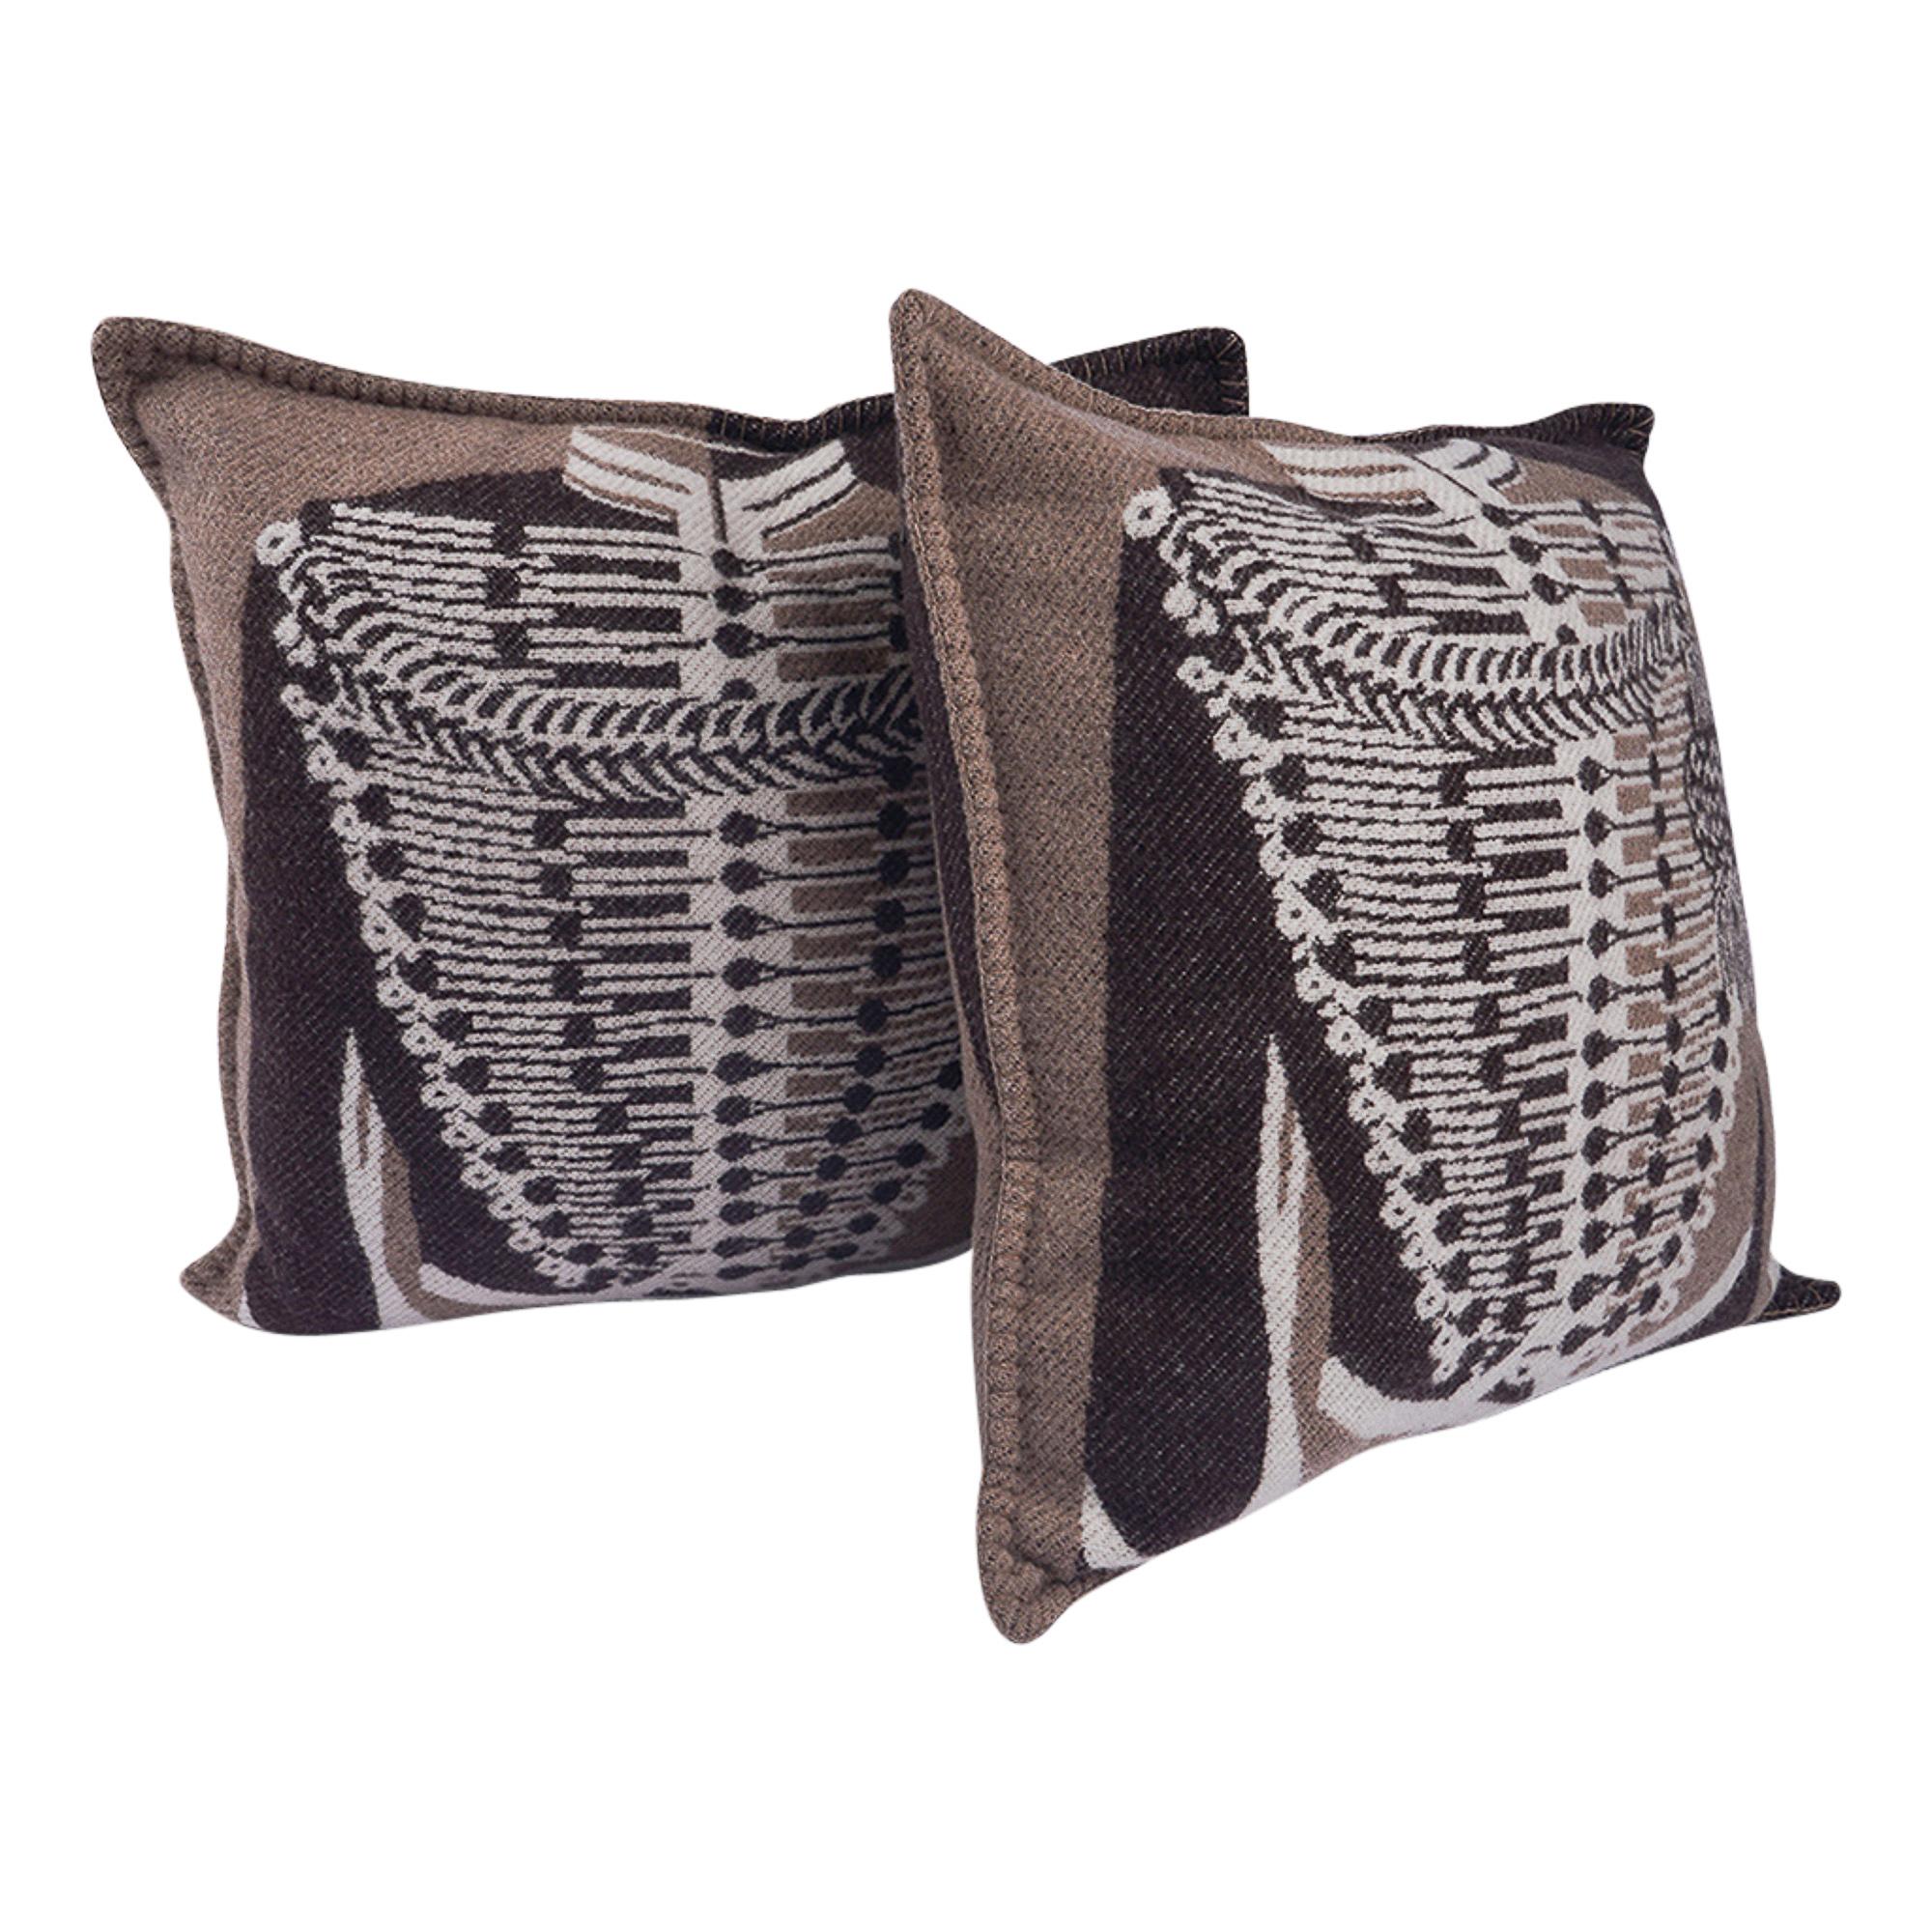 Hermes Pillow Brandebourgs Ecorce Throw Cushion Set of Two In New Condition For Sale In Miami, FL